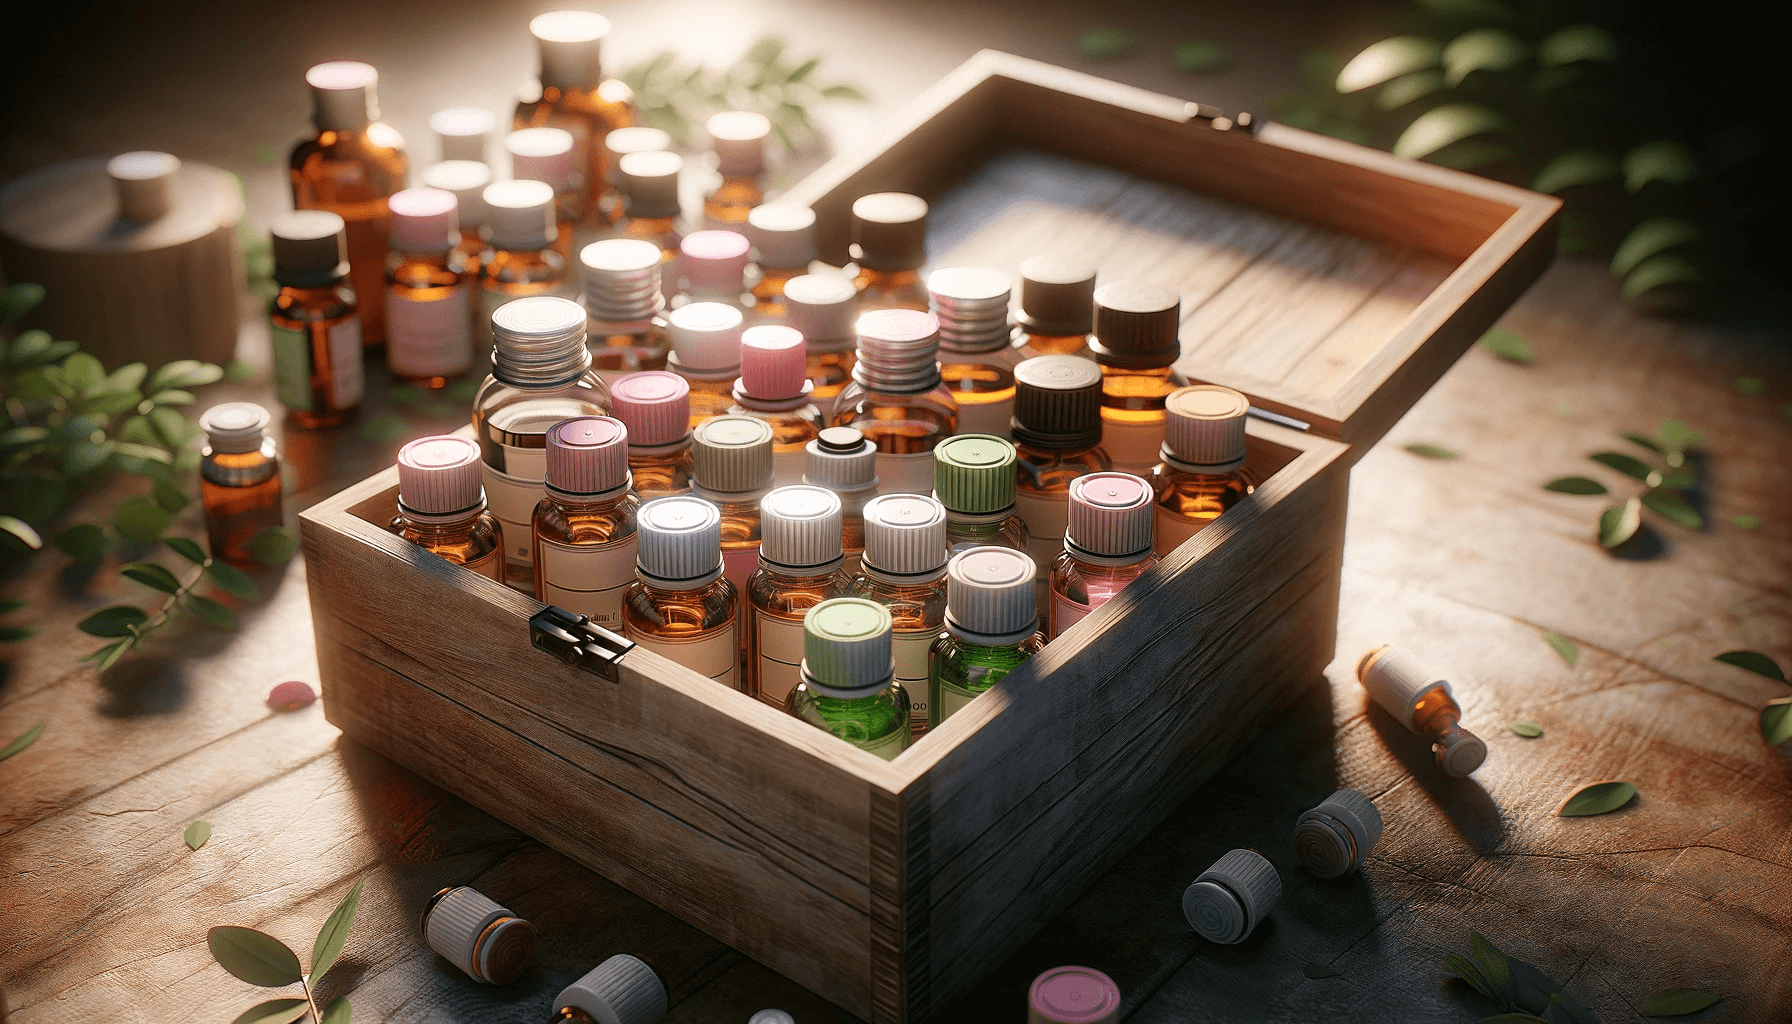 DALL·E 2024 01 19 09.16.06 Create a realistic image of a wooden box filled with various essential oil bottles. The bottles have no brand labels and the focus is on their caps